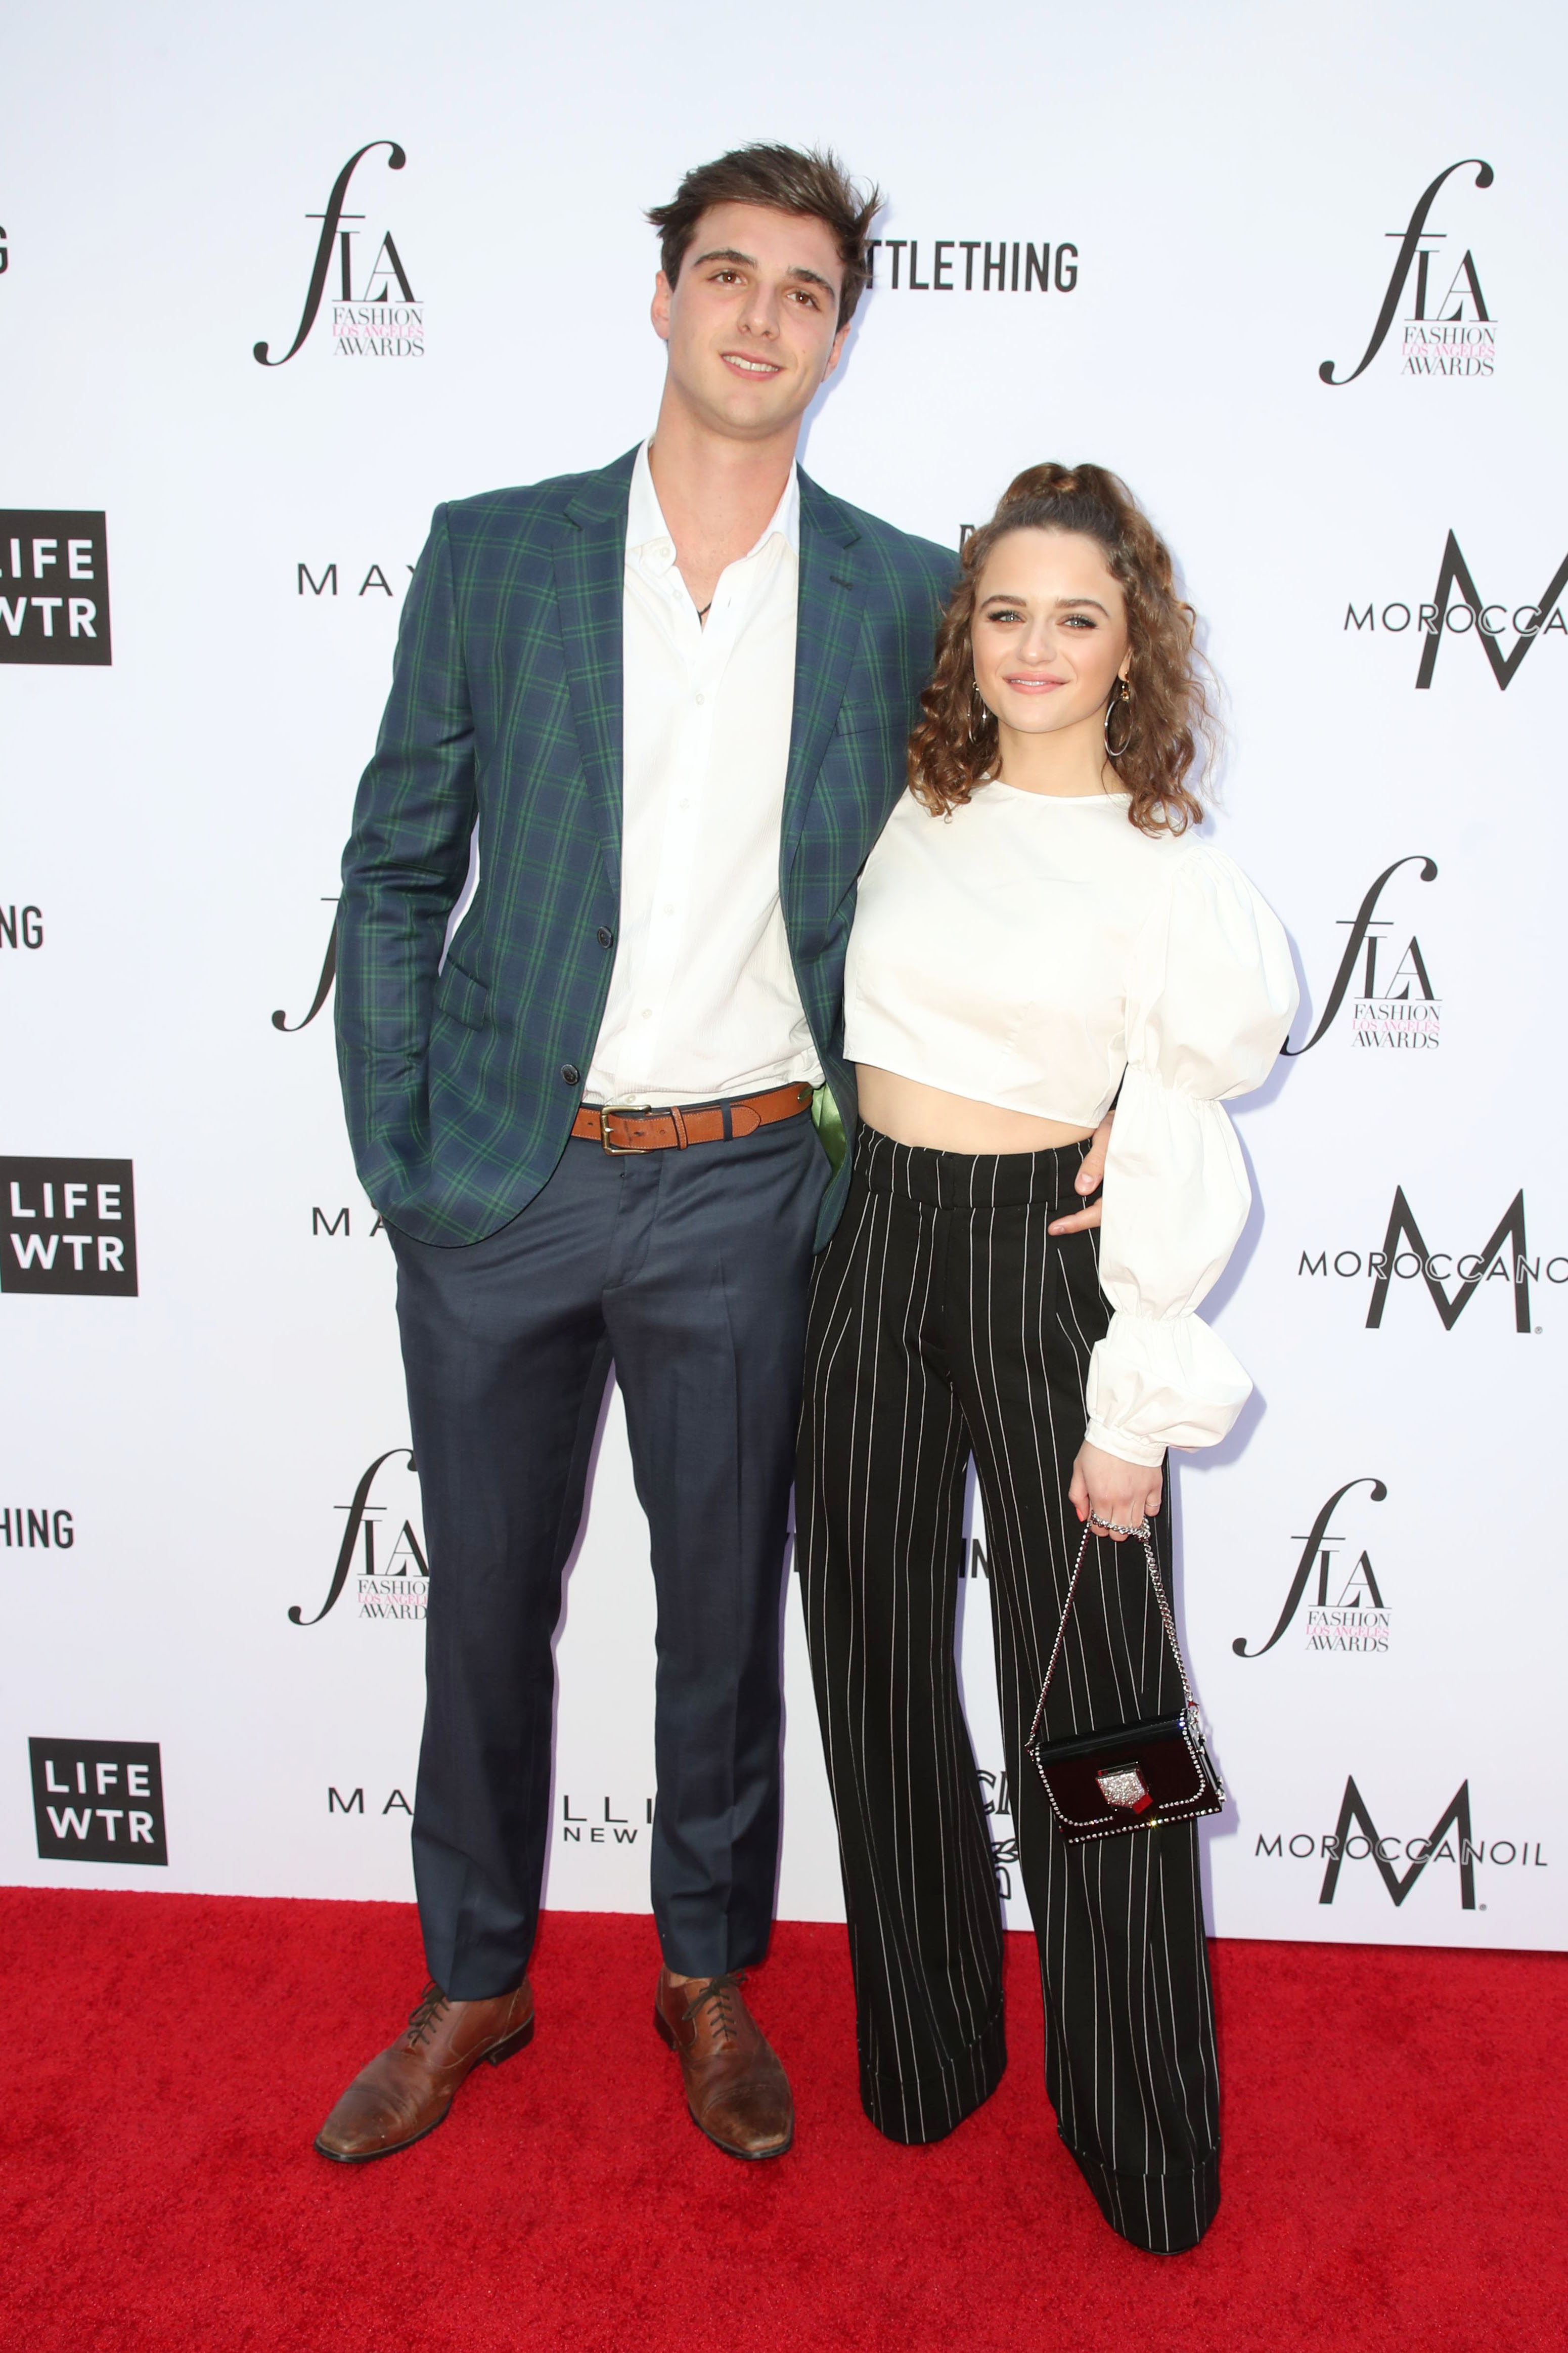 https://www.j-14.com/wp-content/uploads/2014/02/Celeb-couples-height-difference03.jpg?fit=800%2C1200&quality=86&strip=all